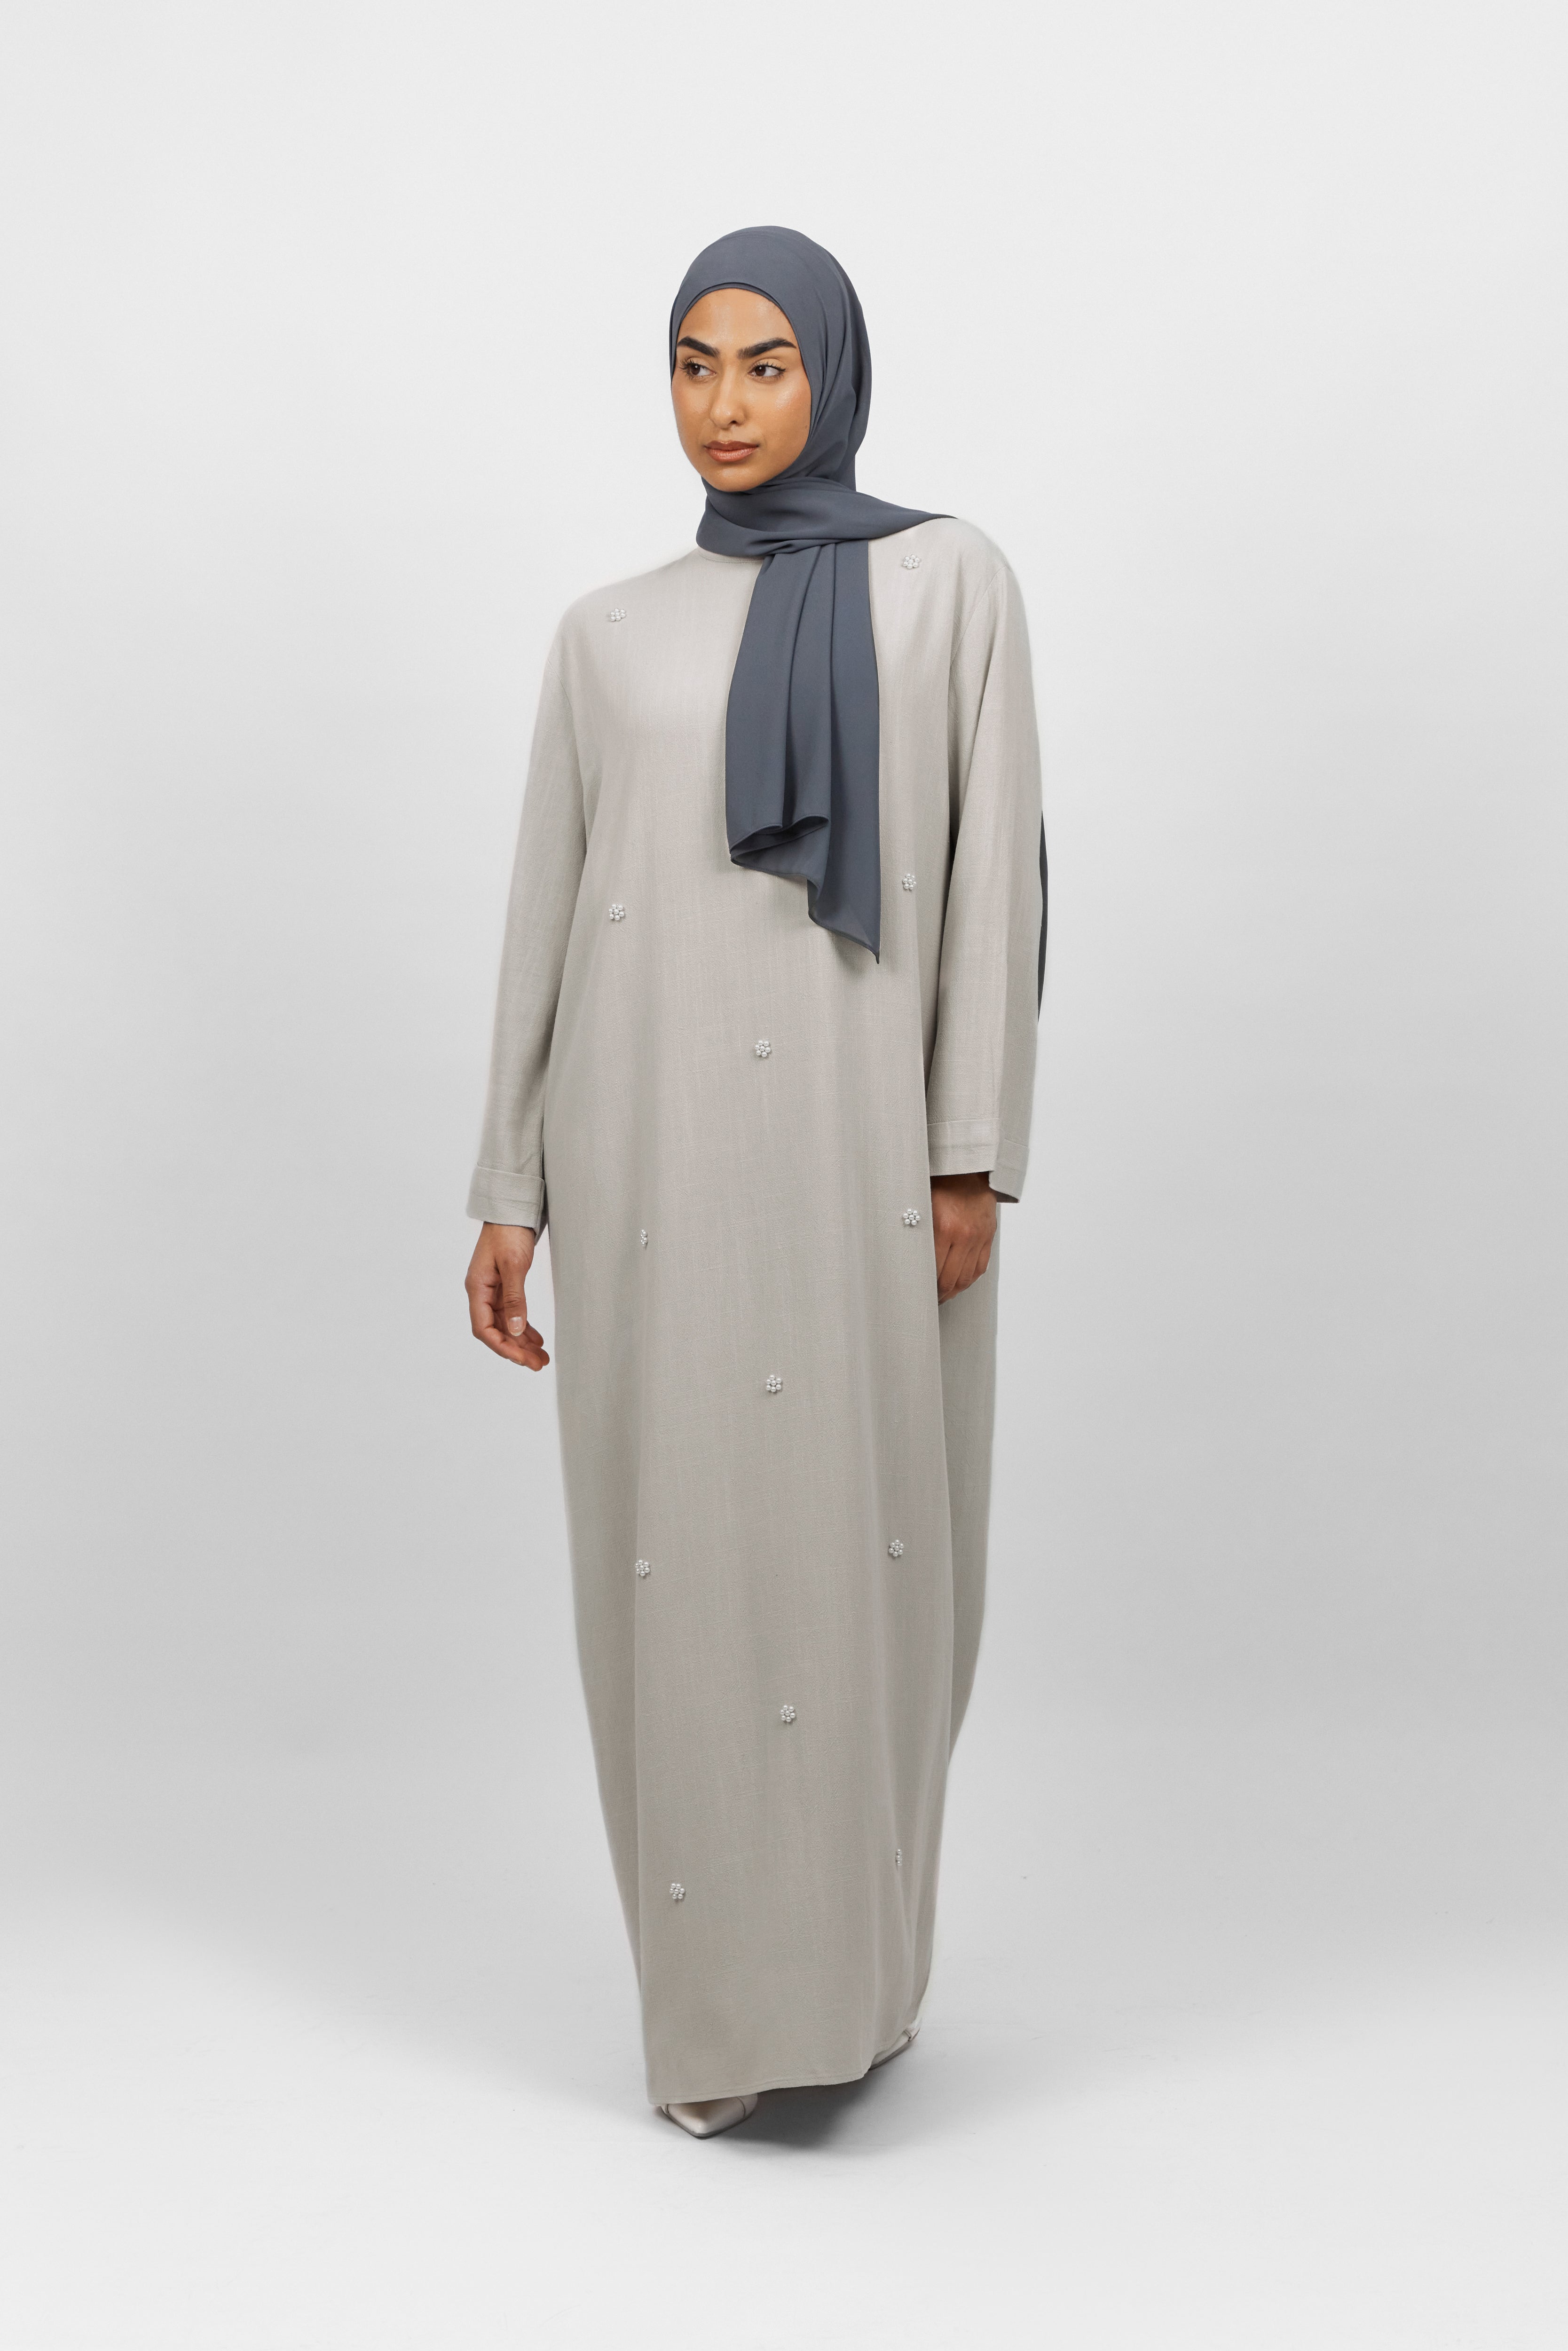 CA - Pearl Relaxed Fit Abaya - Dove Grey